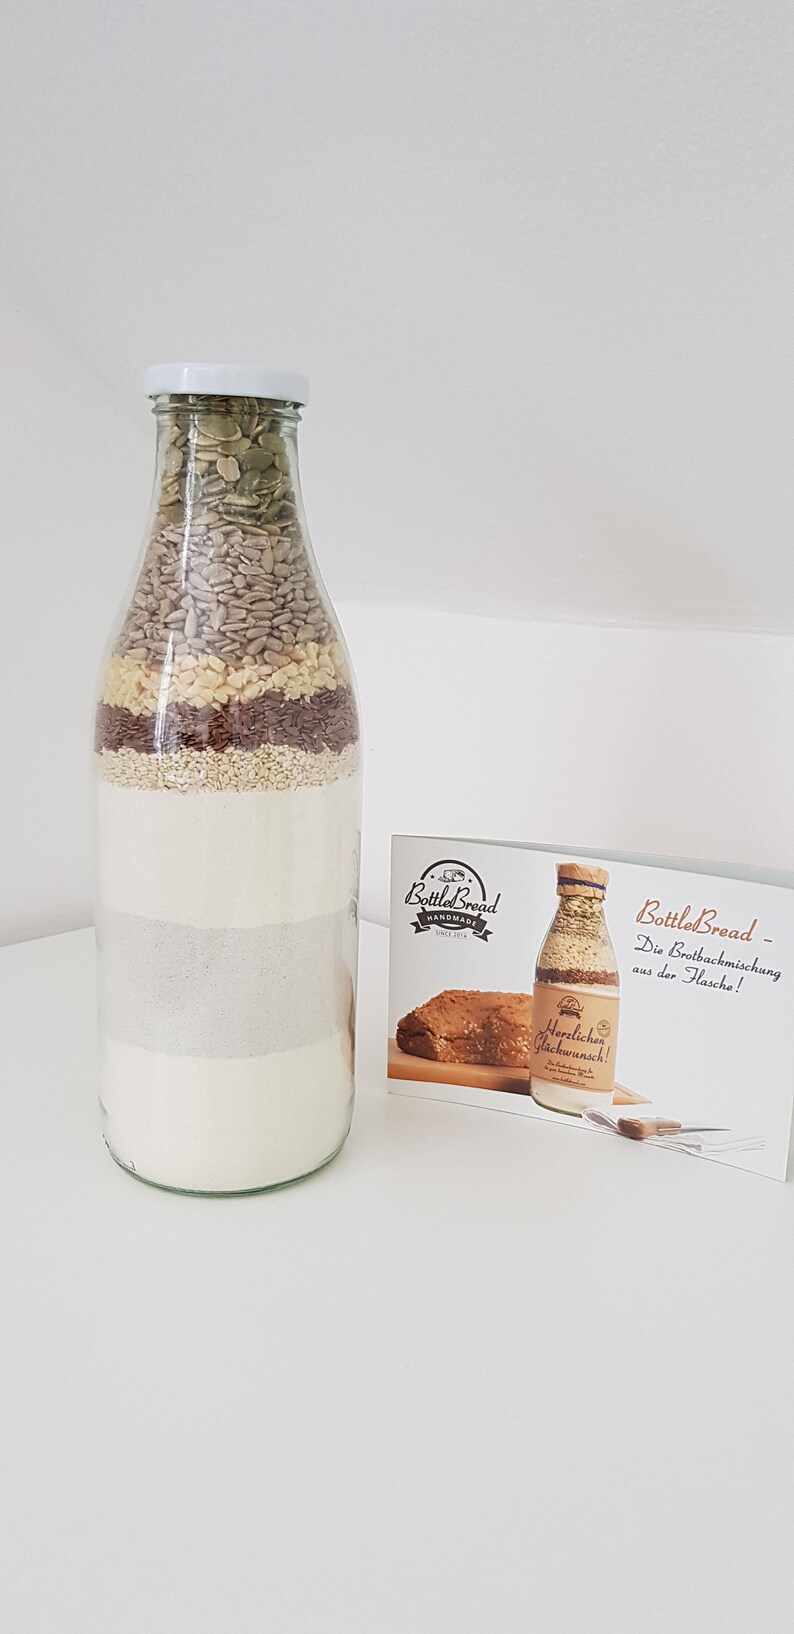 BottleBread Merry Christmas baking mix bread baking mix in a glass bottle image 3